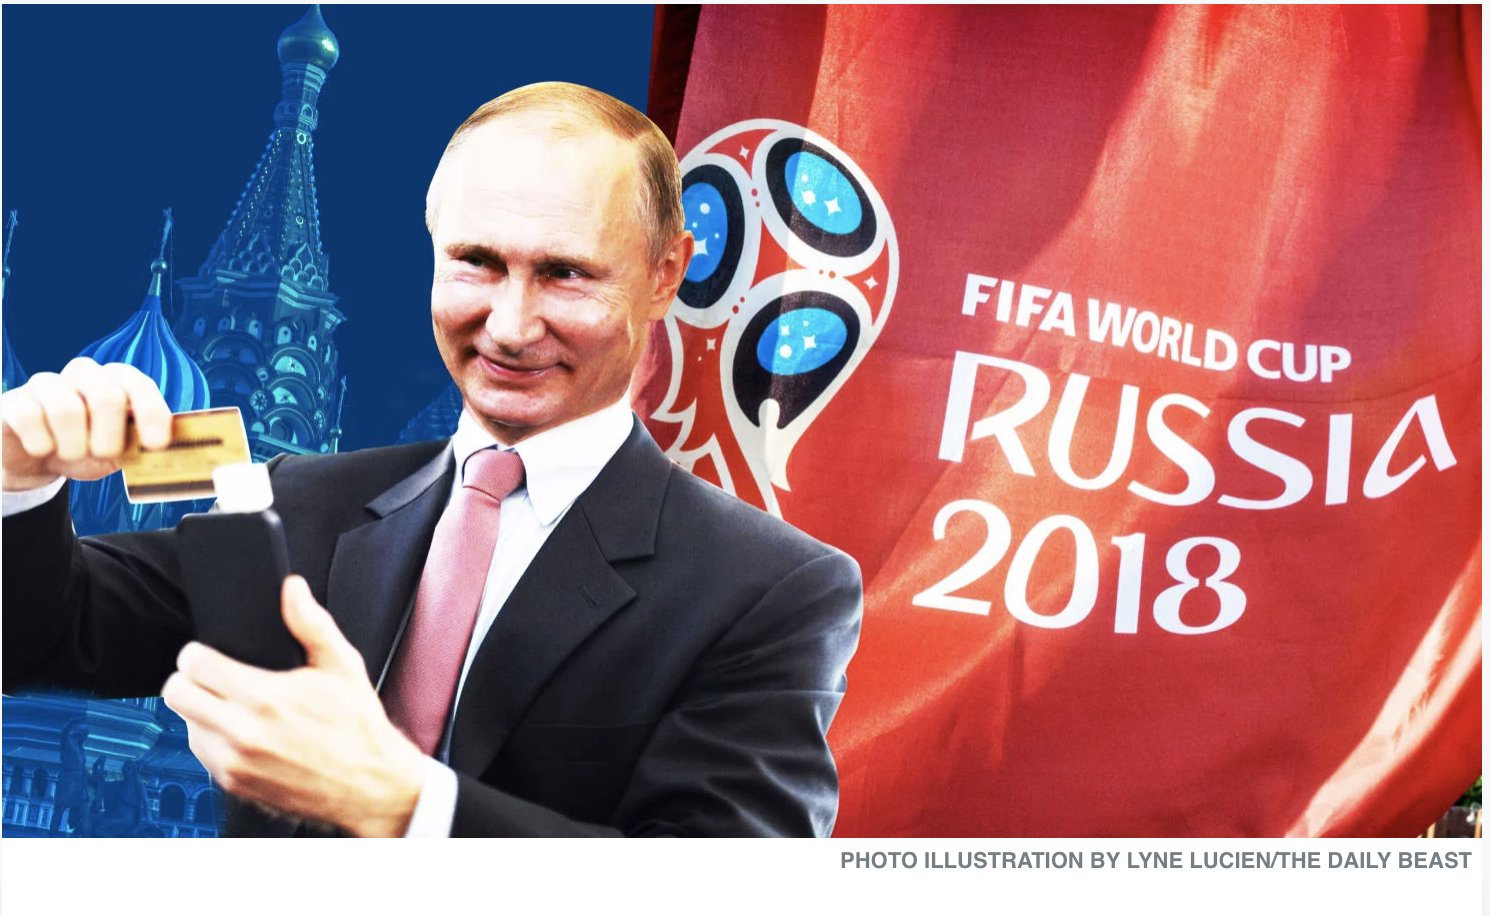 Did Putin Buy the World Cup? The FBI’s Not Saying—Yet